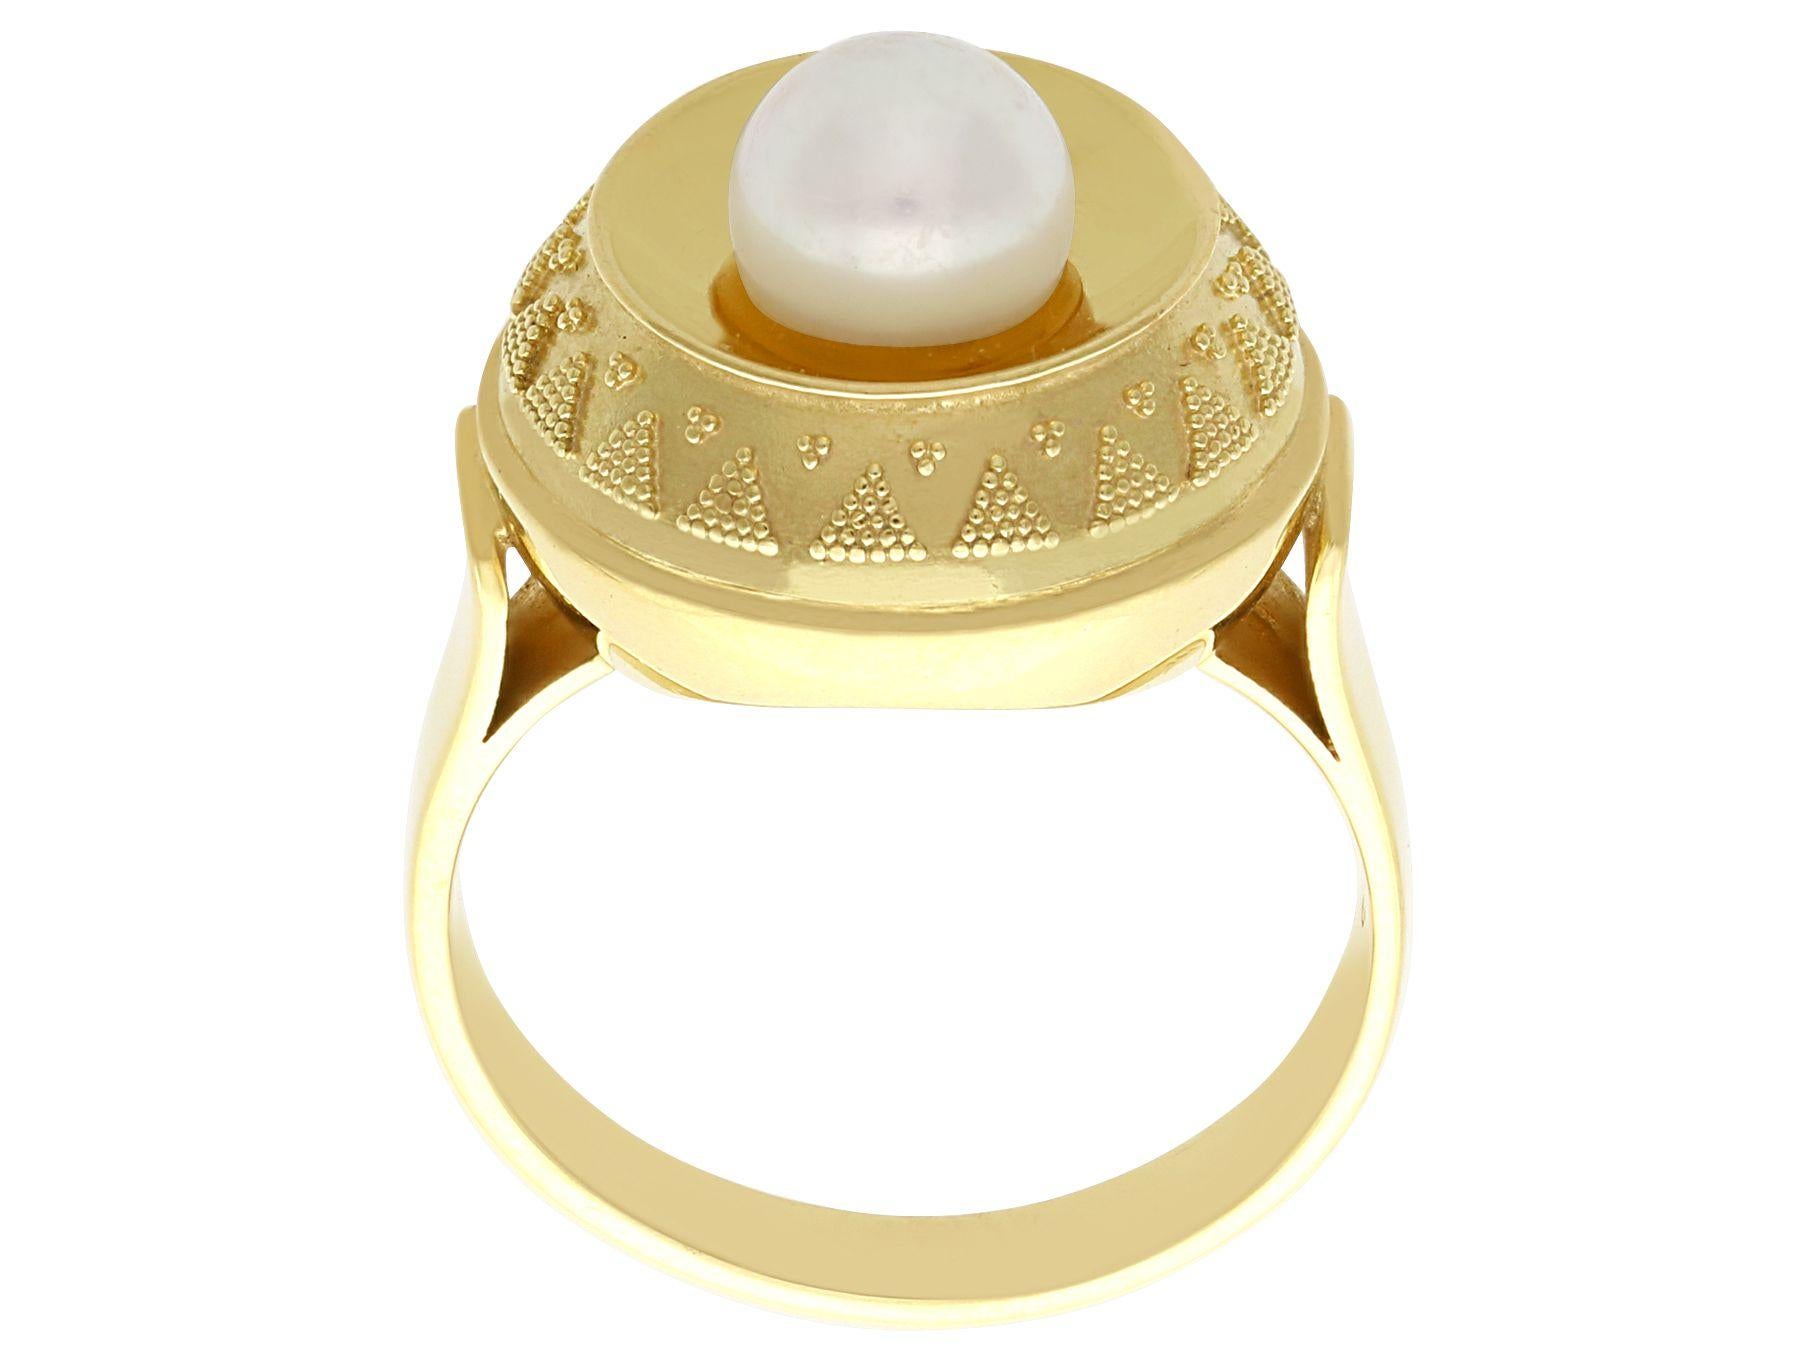 1960s Cultured Pearl 14k Yellow Gold Cocktail Ring In Excellent Condition For Sale In Jesmond, Newcastle Upon Tyne